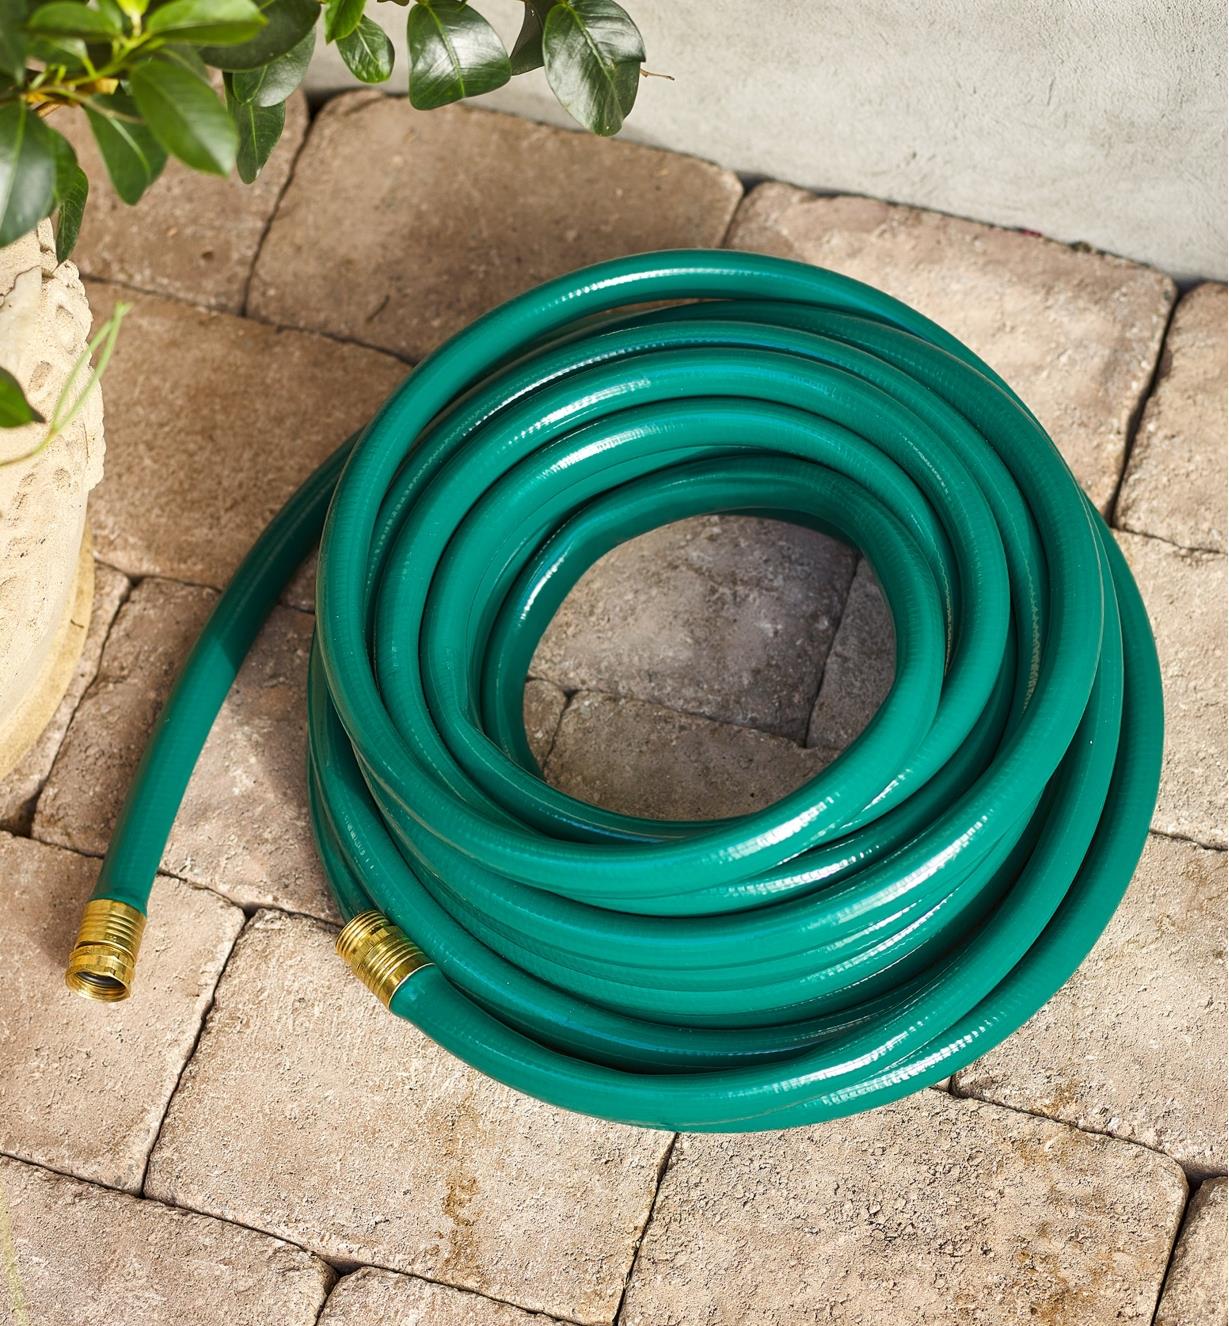 A hose coiled on patio stones